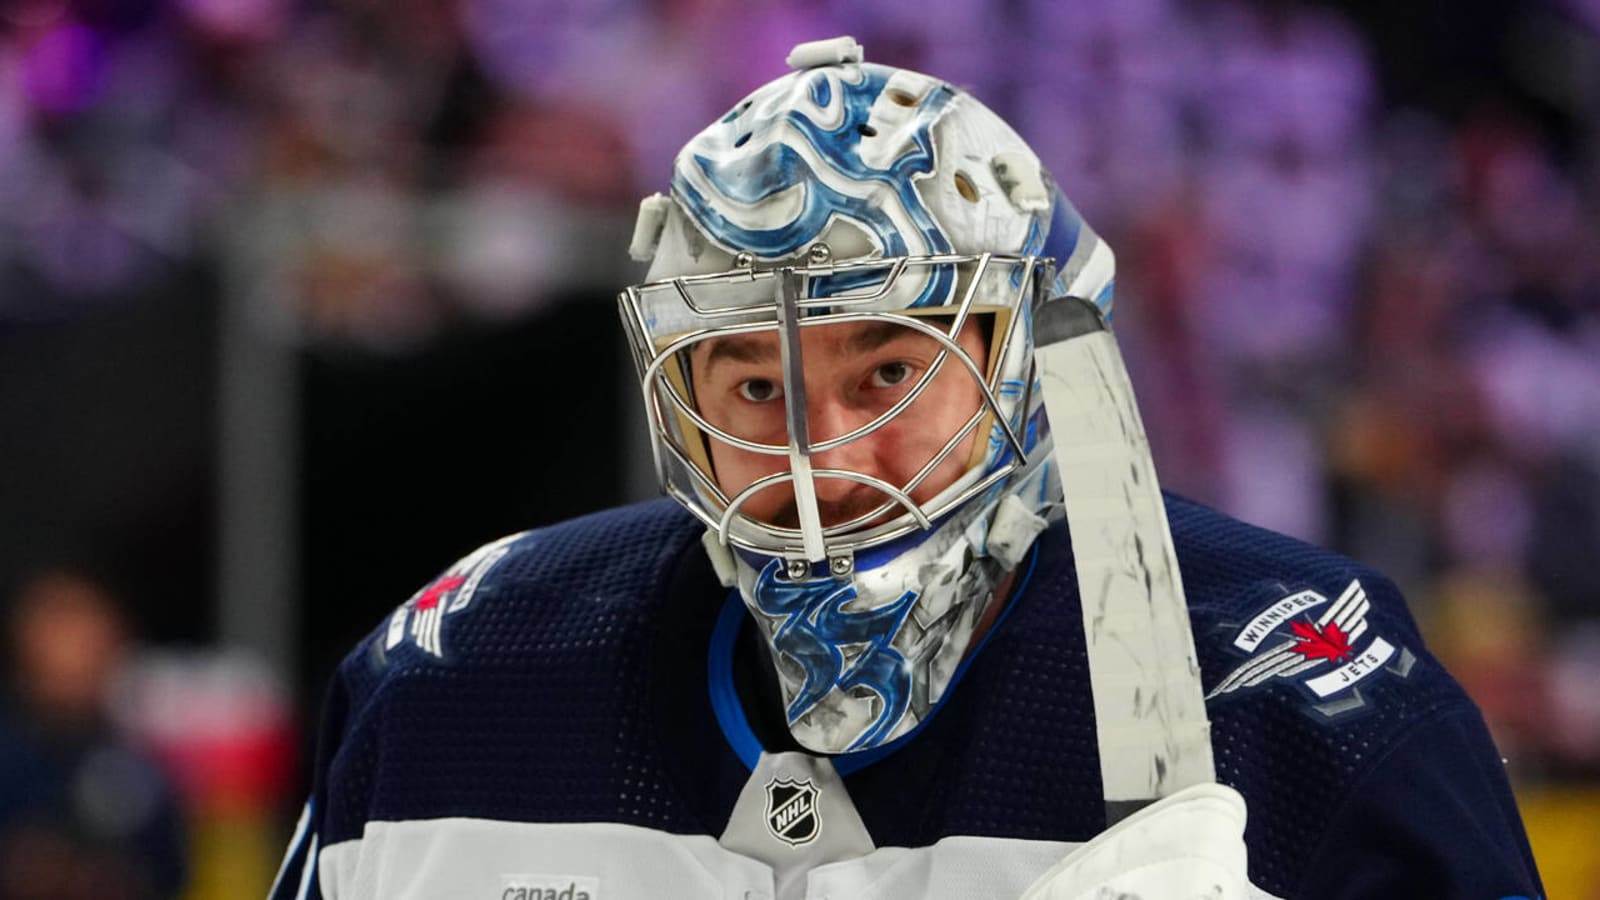 Former All-Star goaltender placed on waivers by Kings